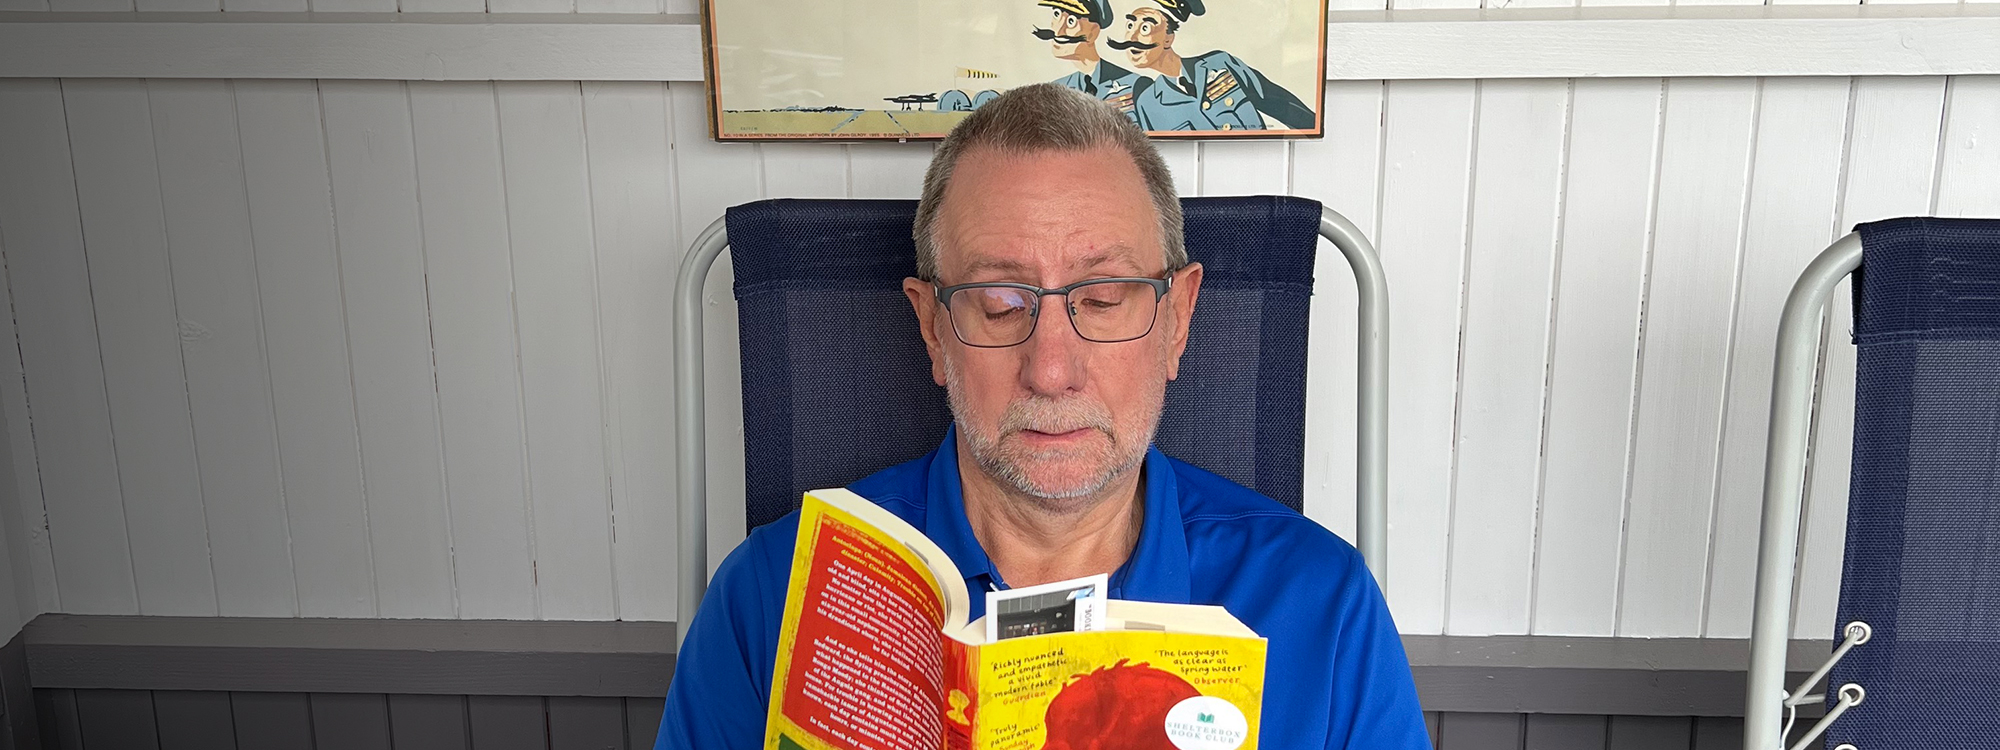 Author Brian Stewart sitting and reading a book from the ShelterBox book club